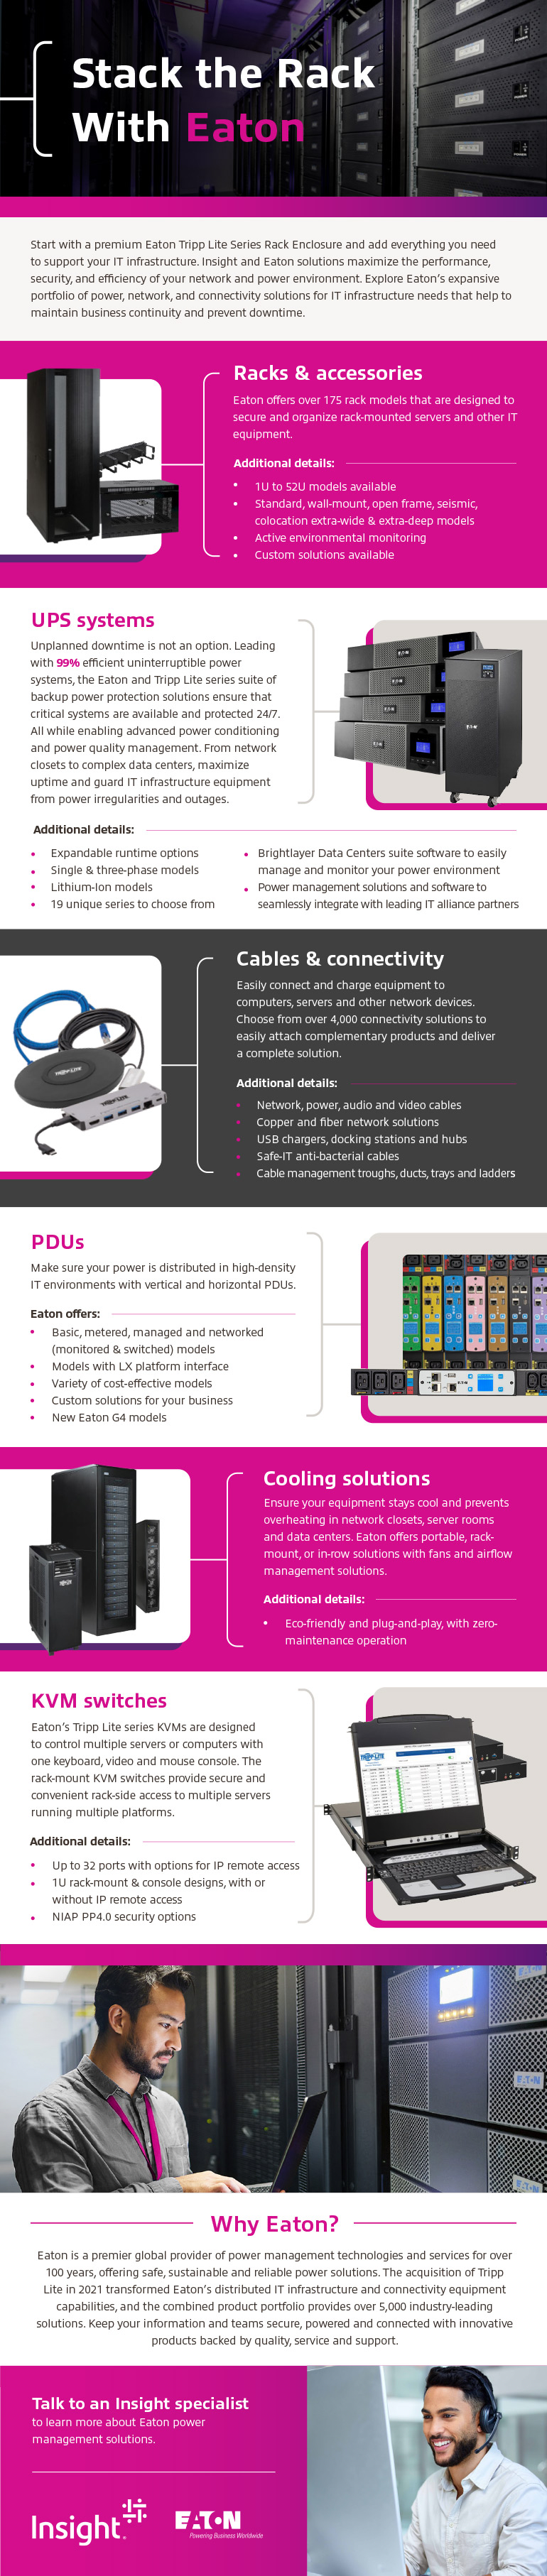 Stack the Rack With Eaton infographic